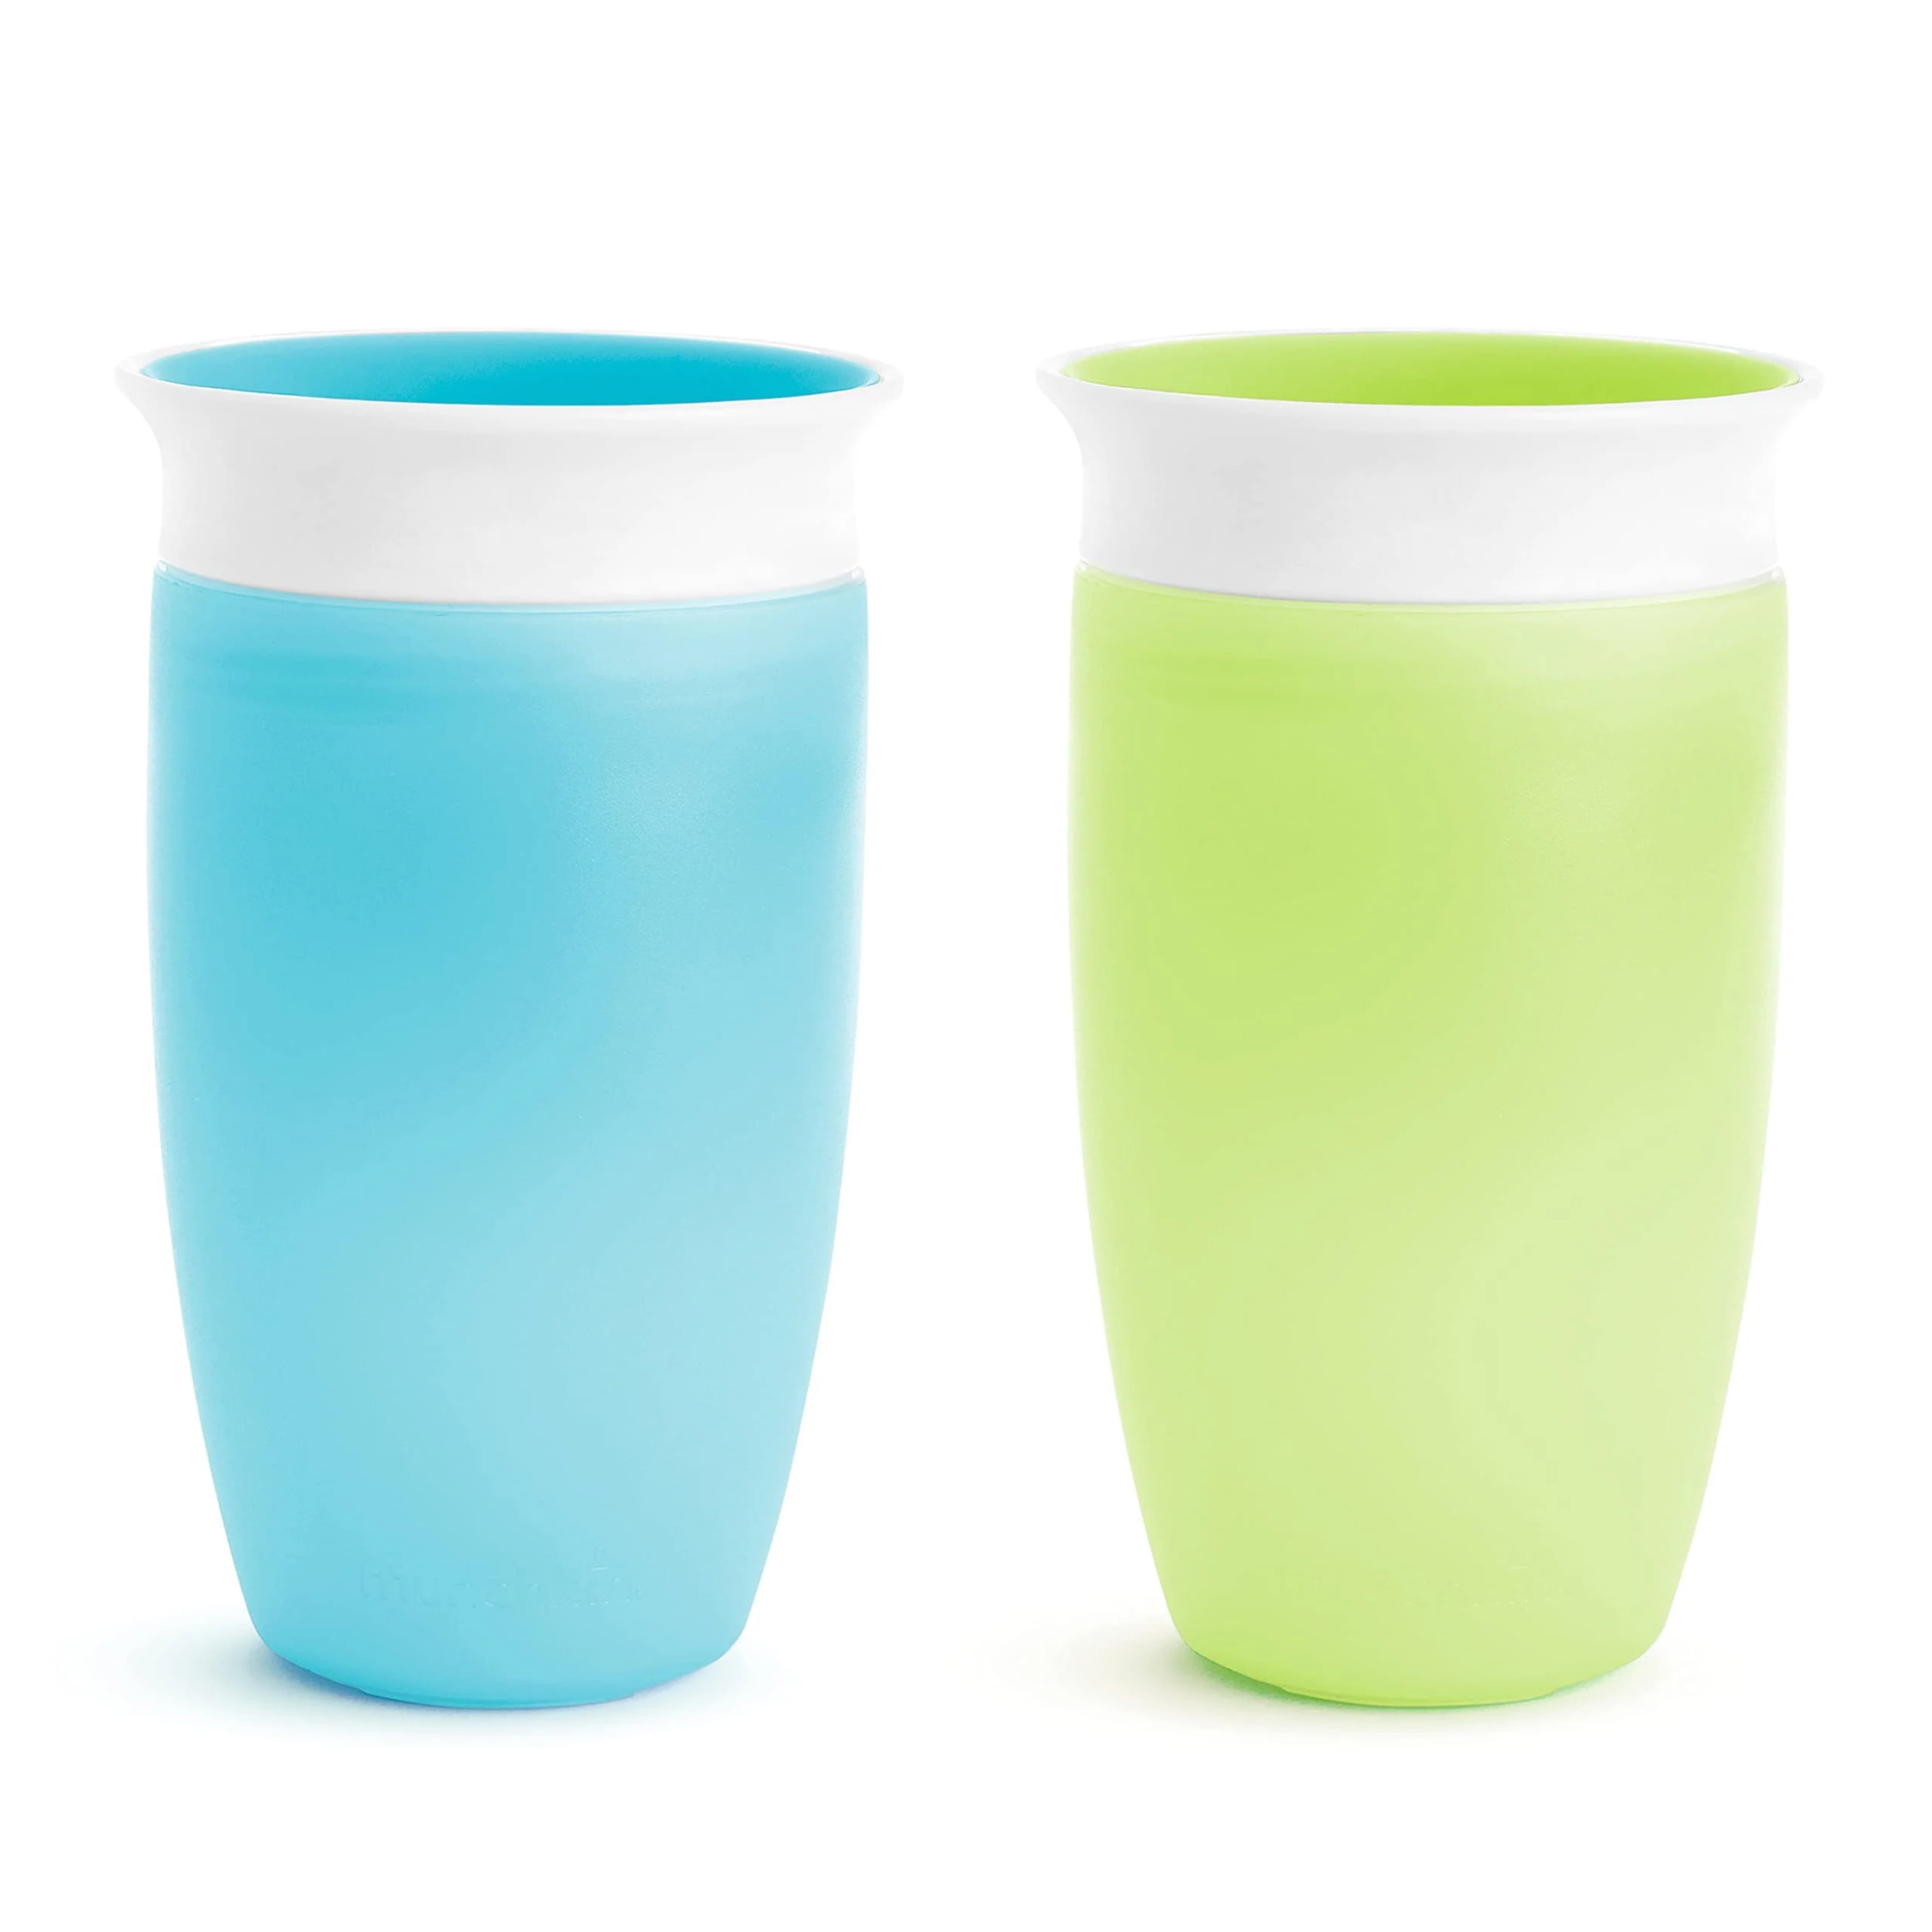 RE-PLAY NO-SPILL SIPPY CUP – Buttercup Baby Co.